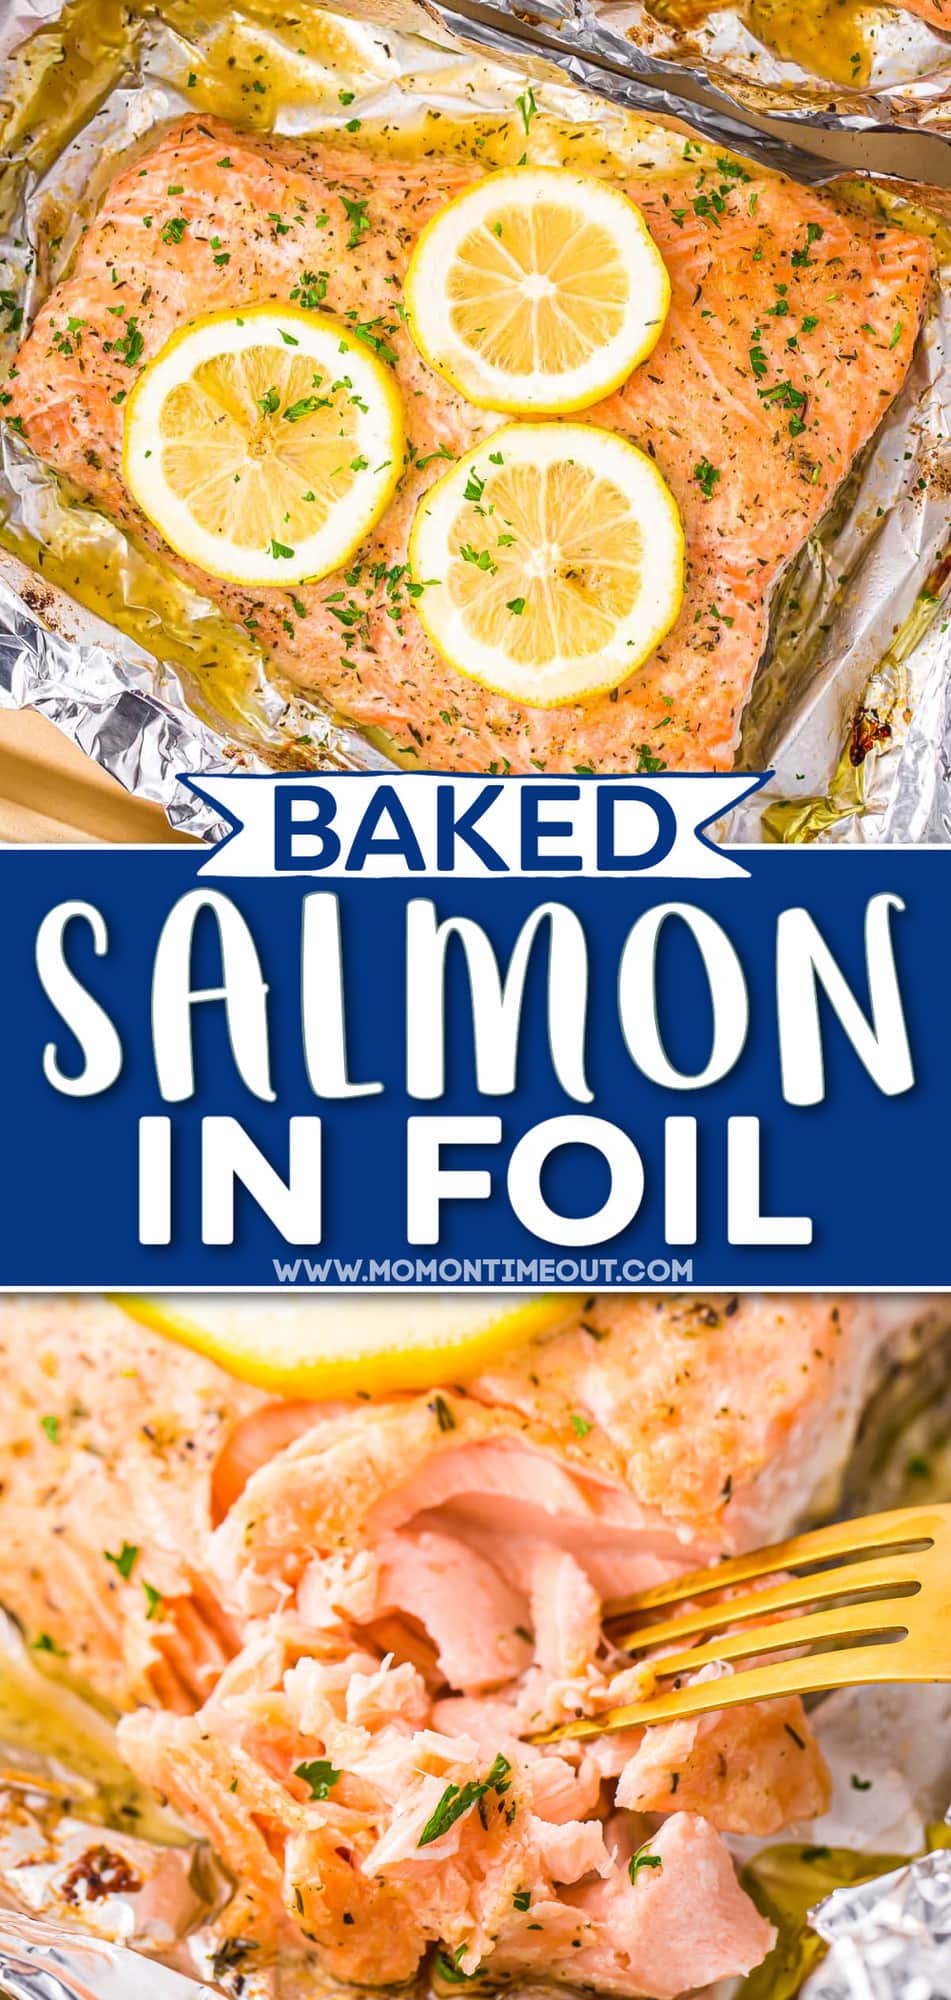 Baked Salmon In Foil - Easy, Healthy, Delicious! | Mom On Timeout